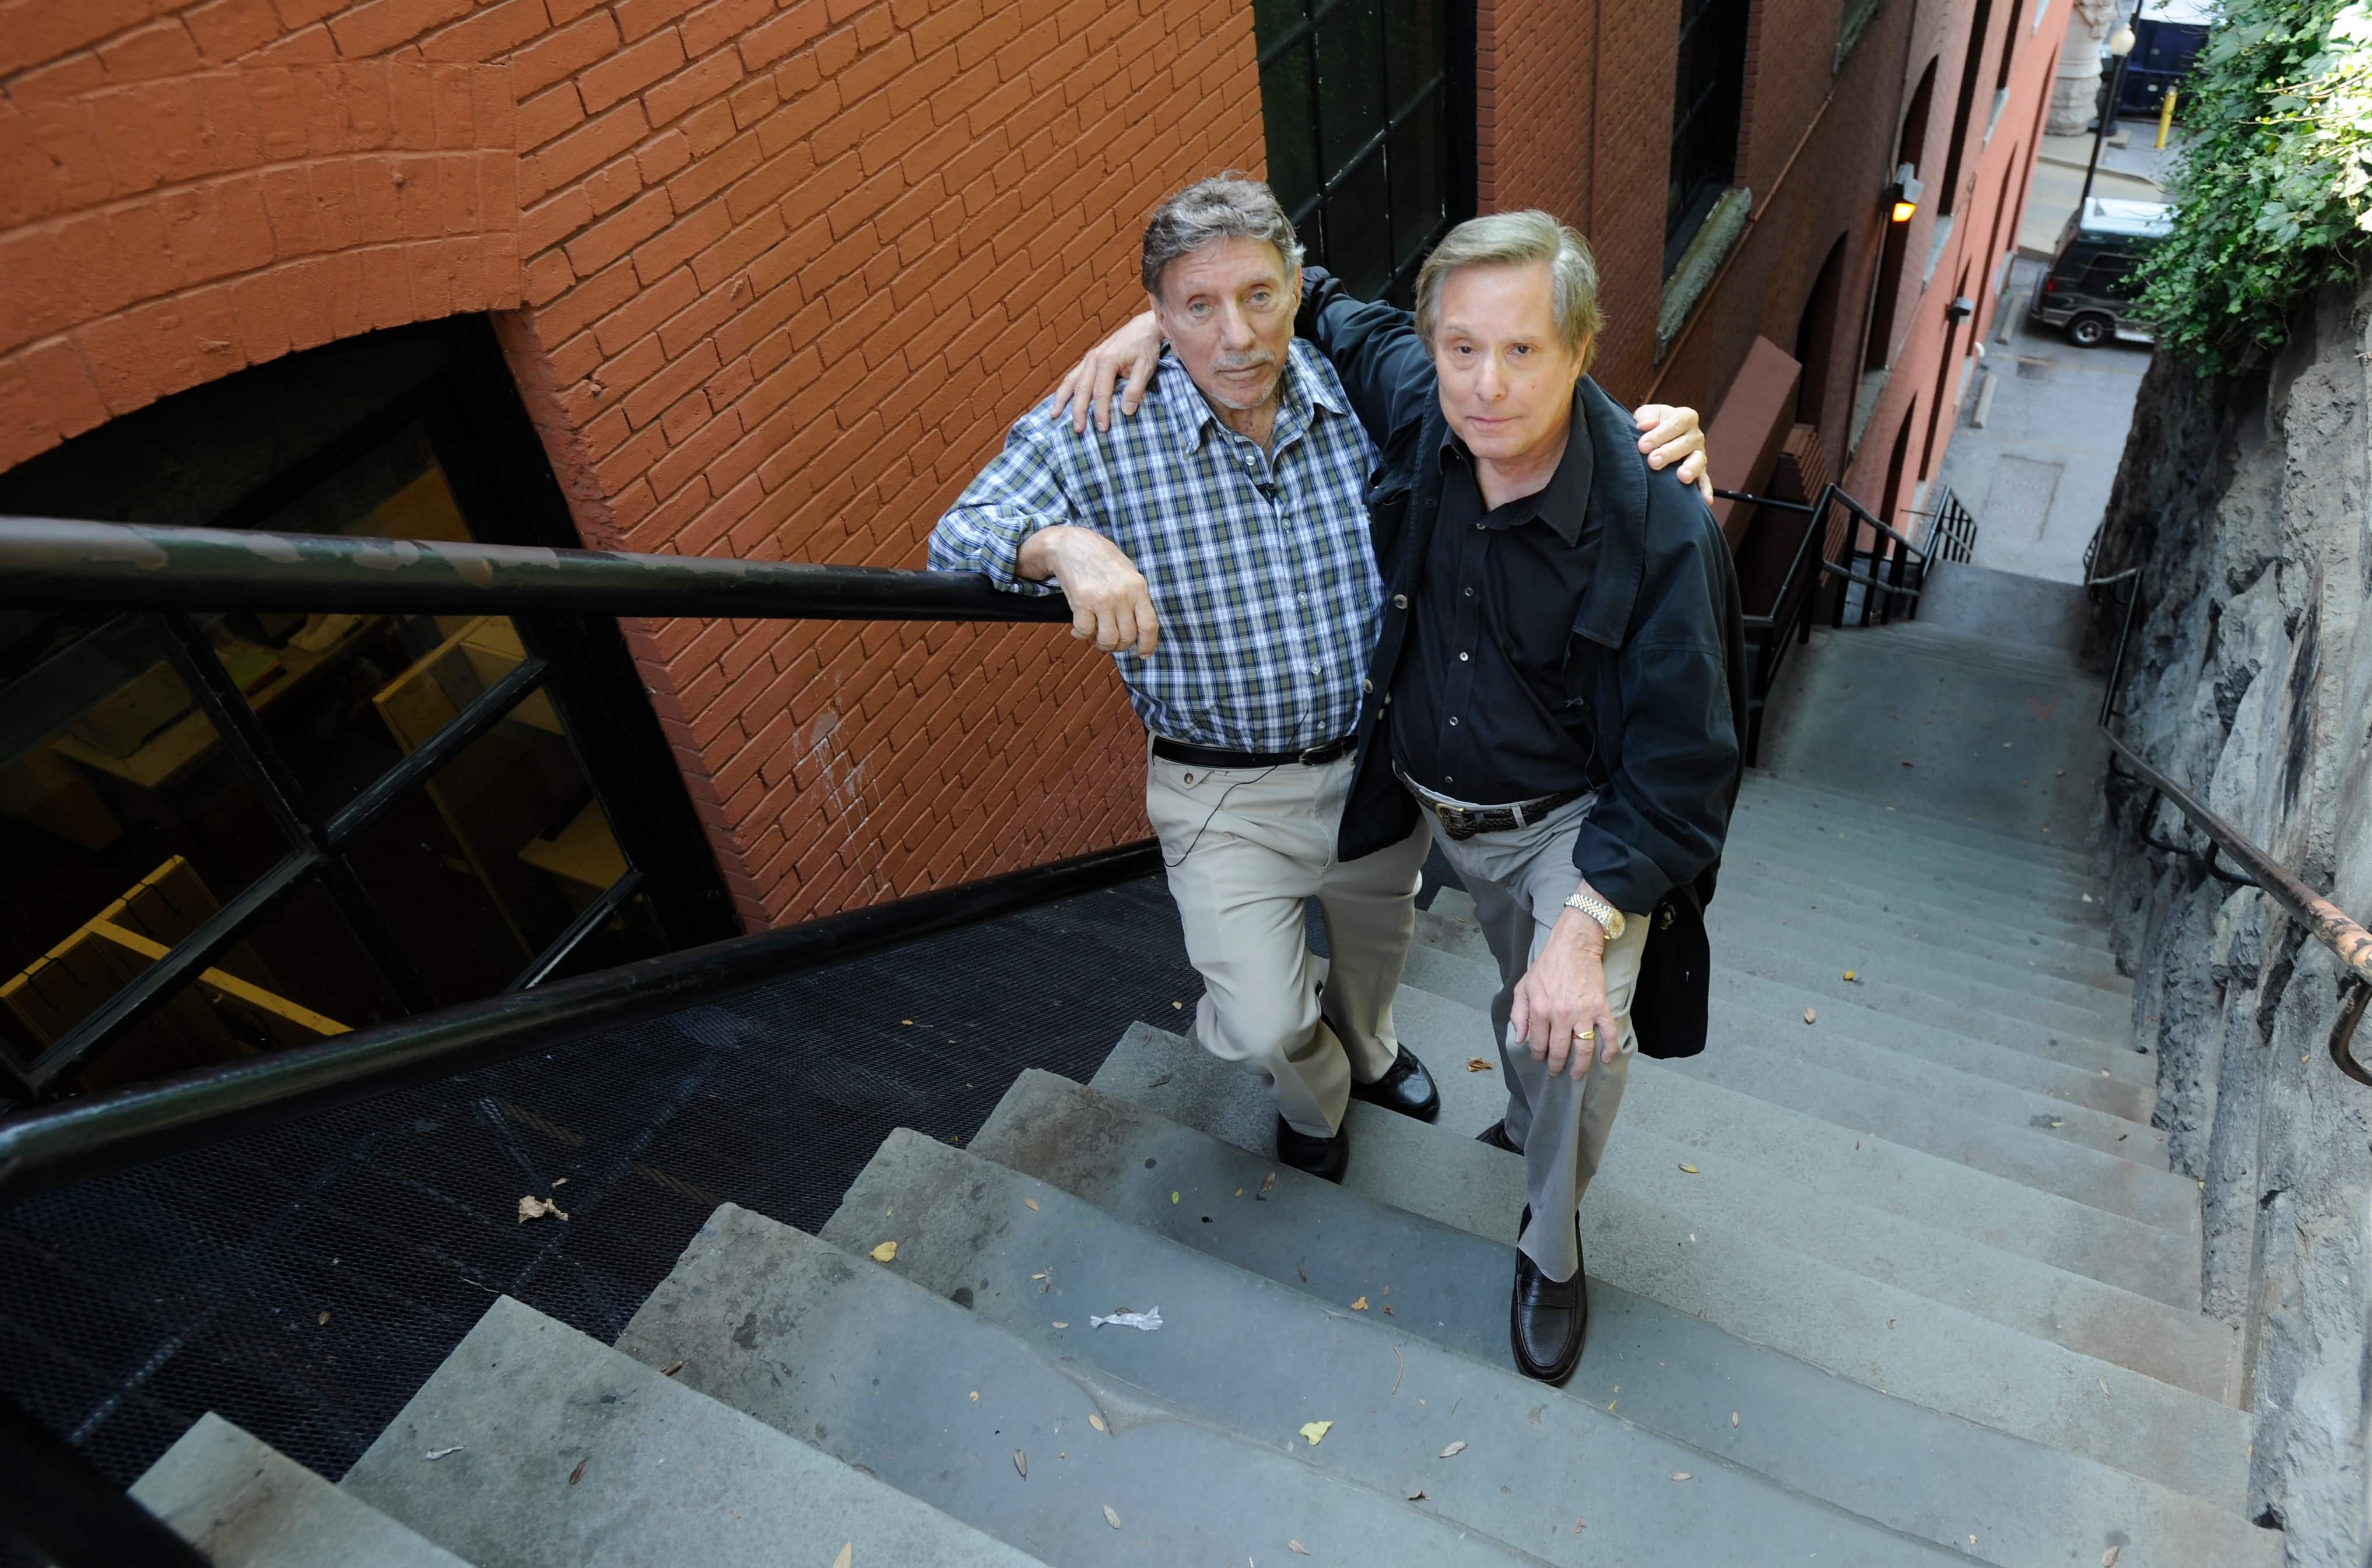 Author William Peter Blatty and Director William Friedkin at Georgetown University (photo credit: USA Today)